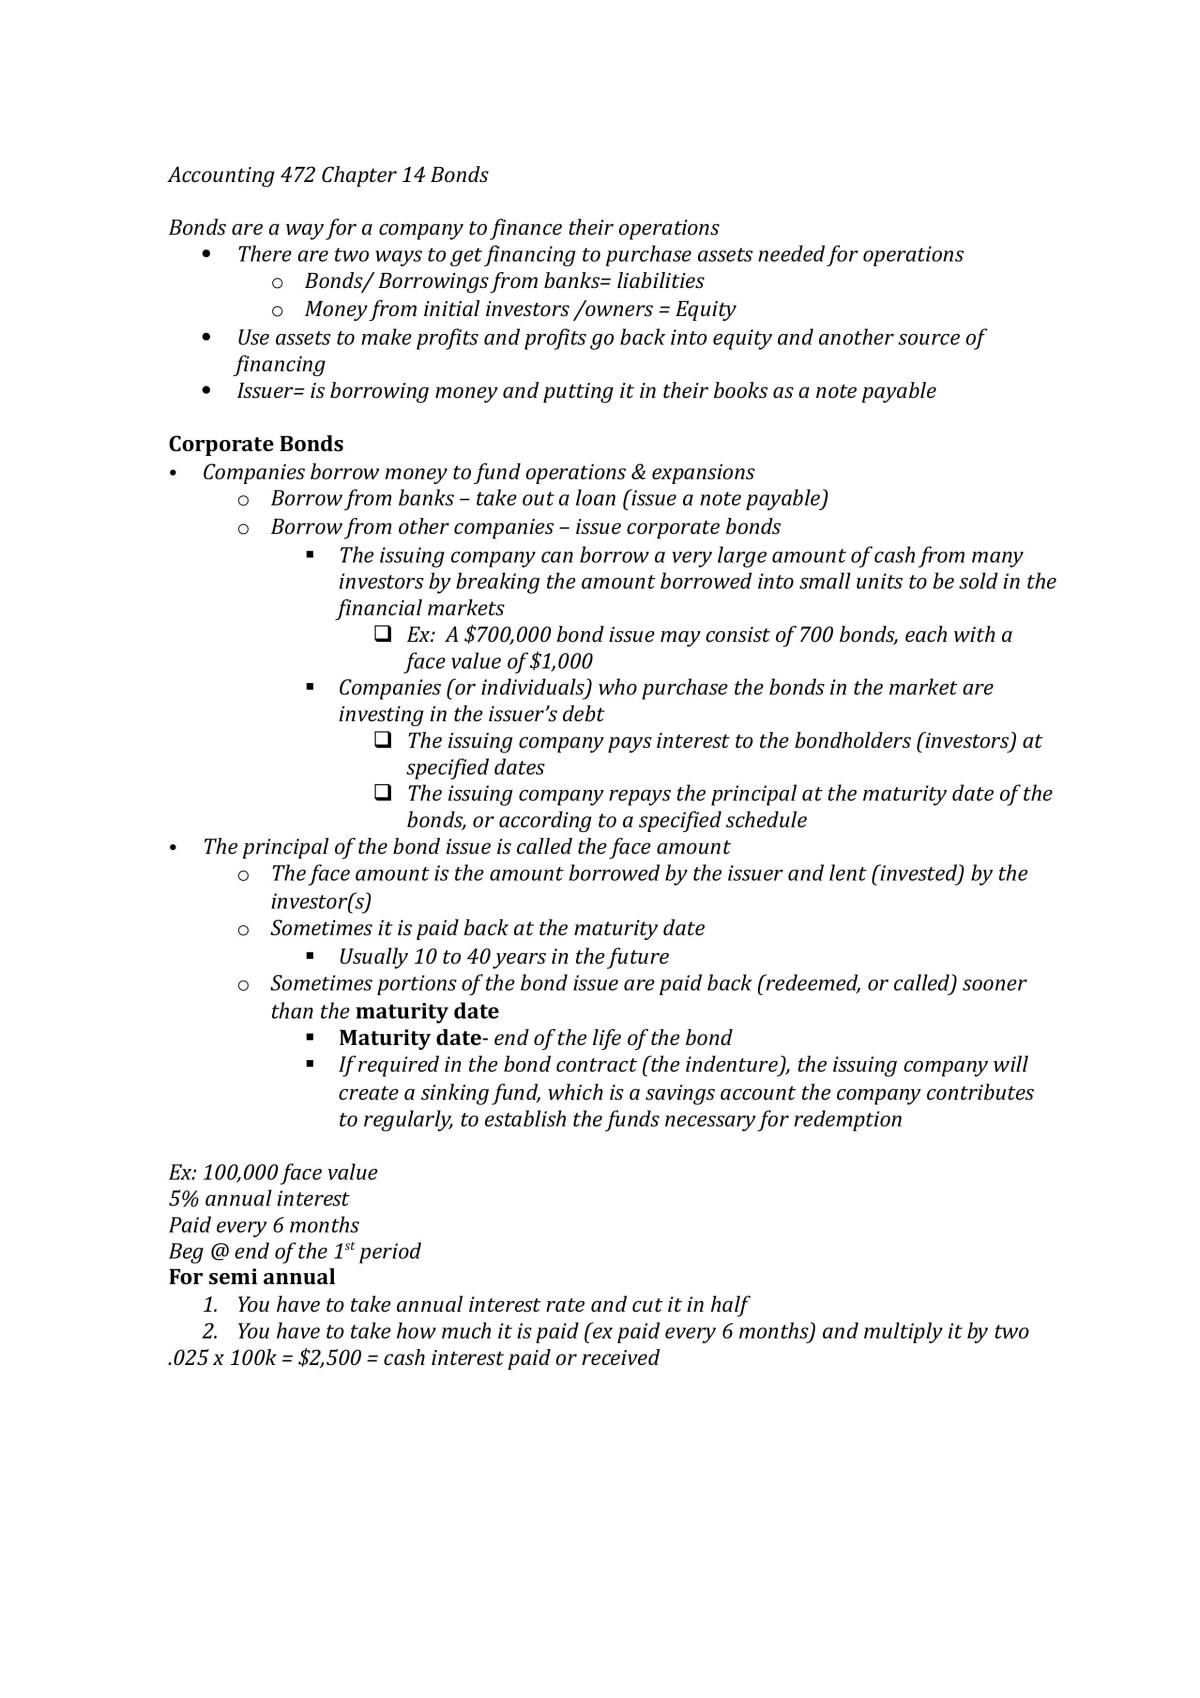 Lectures Notes from Week 7-9 - Page 1